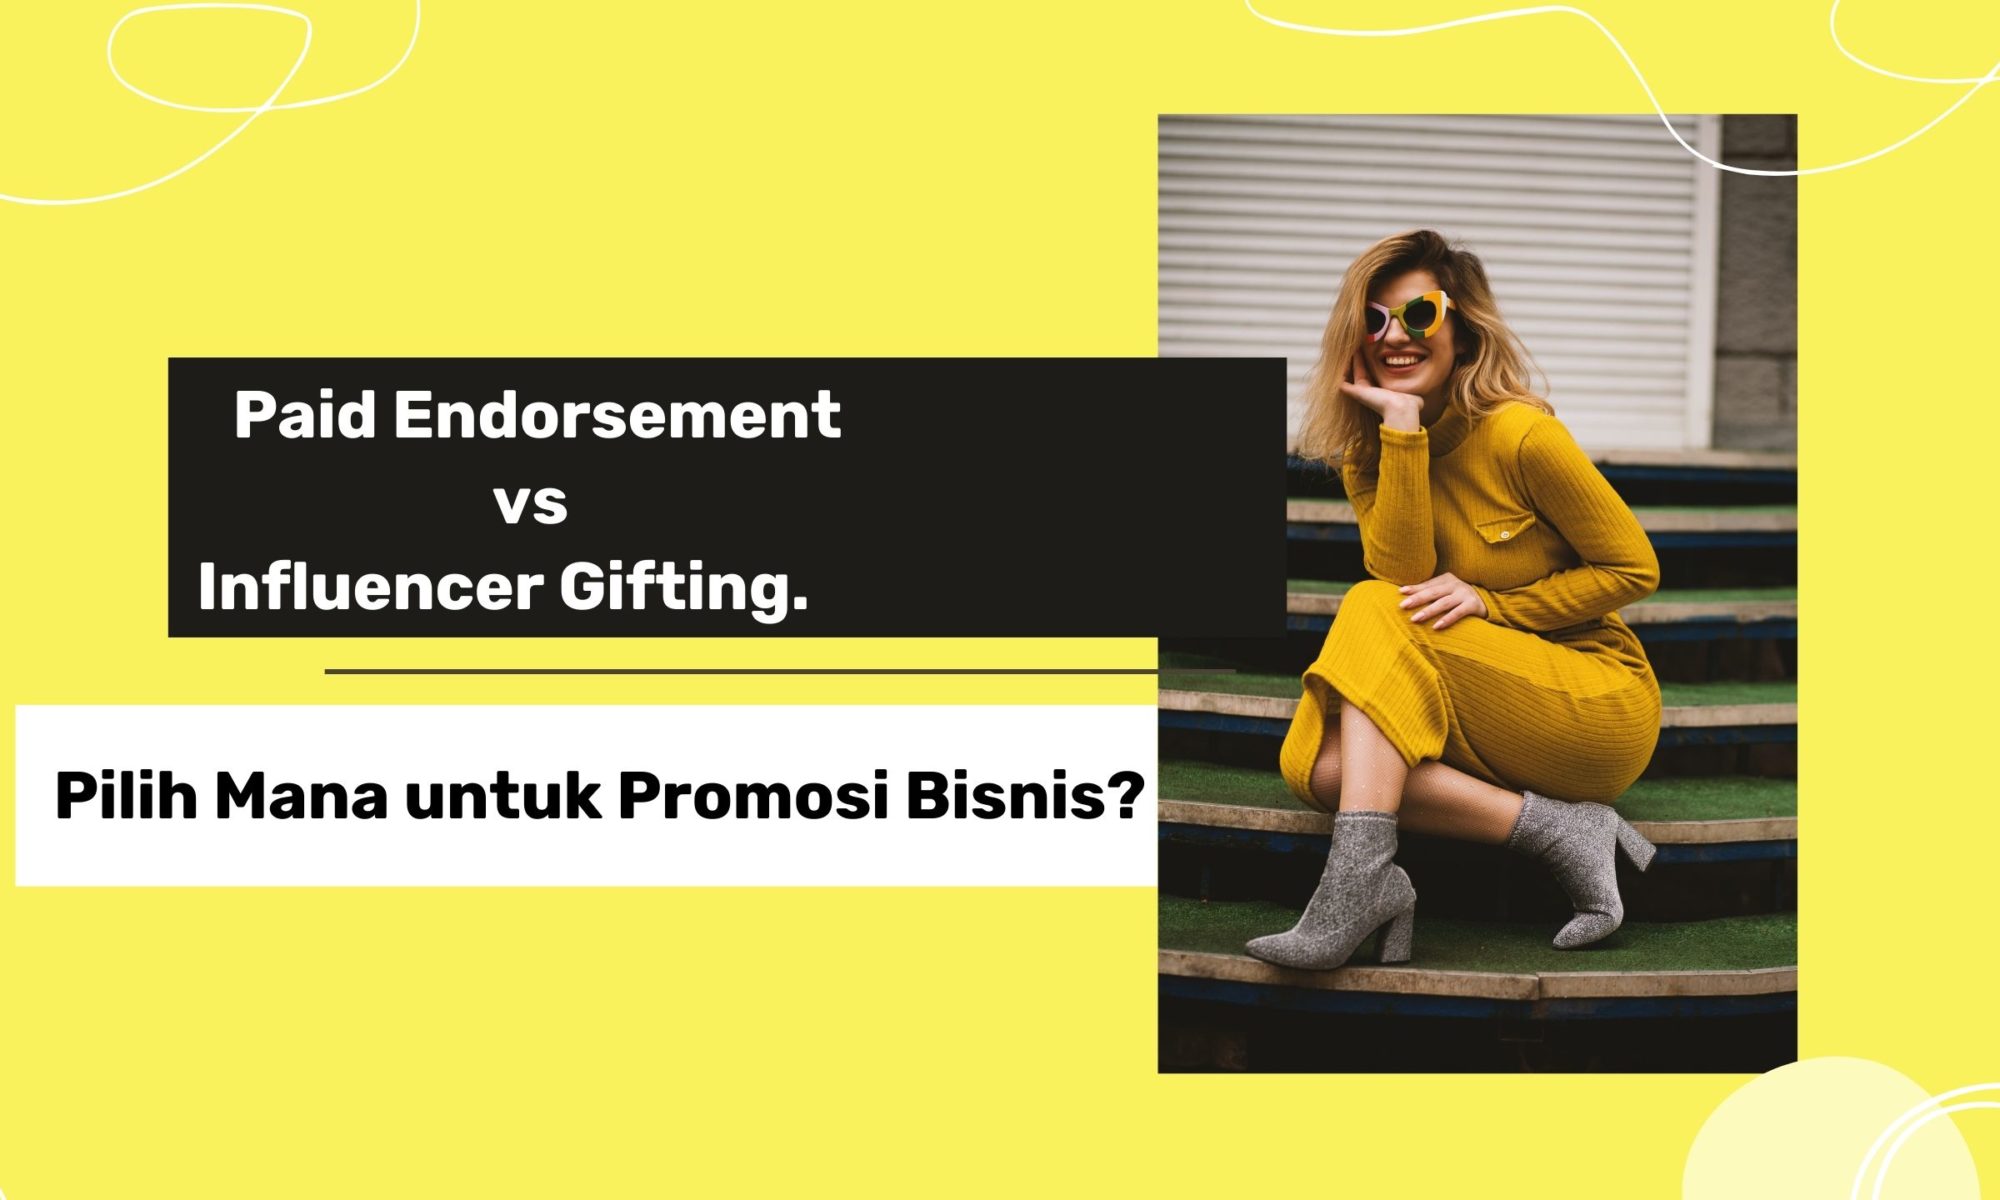 paid endorsements are